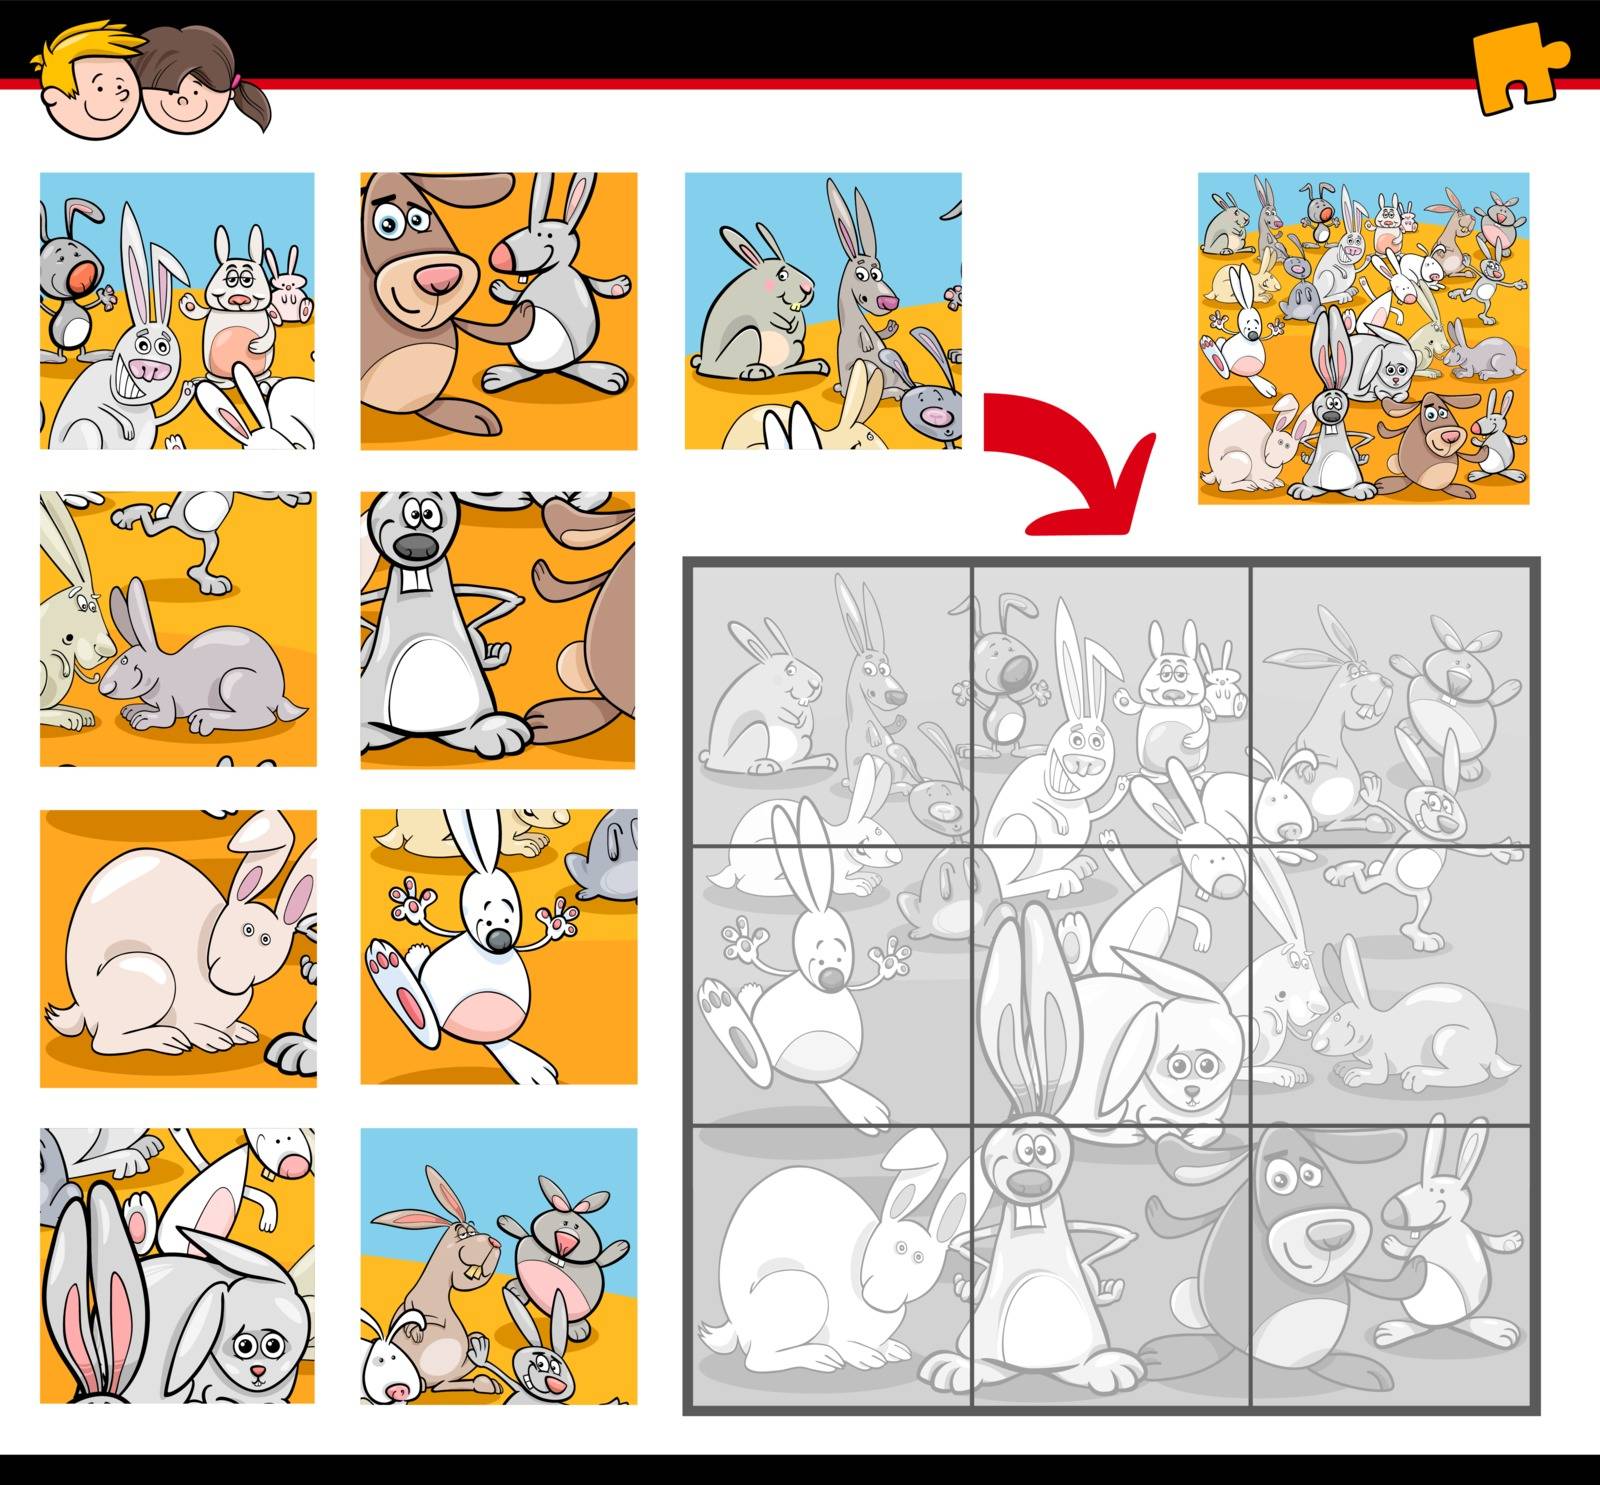 Cartoon Illustration of Education Jigsaw Puzzle Activity for Children with Bunnies Animal Characters